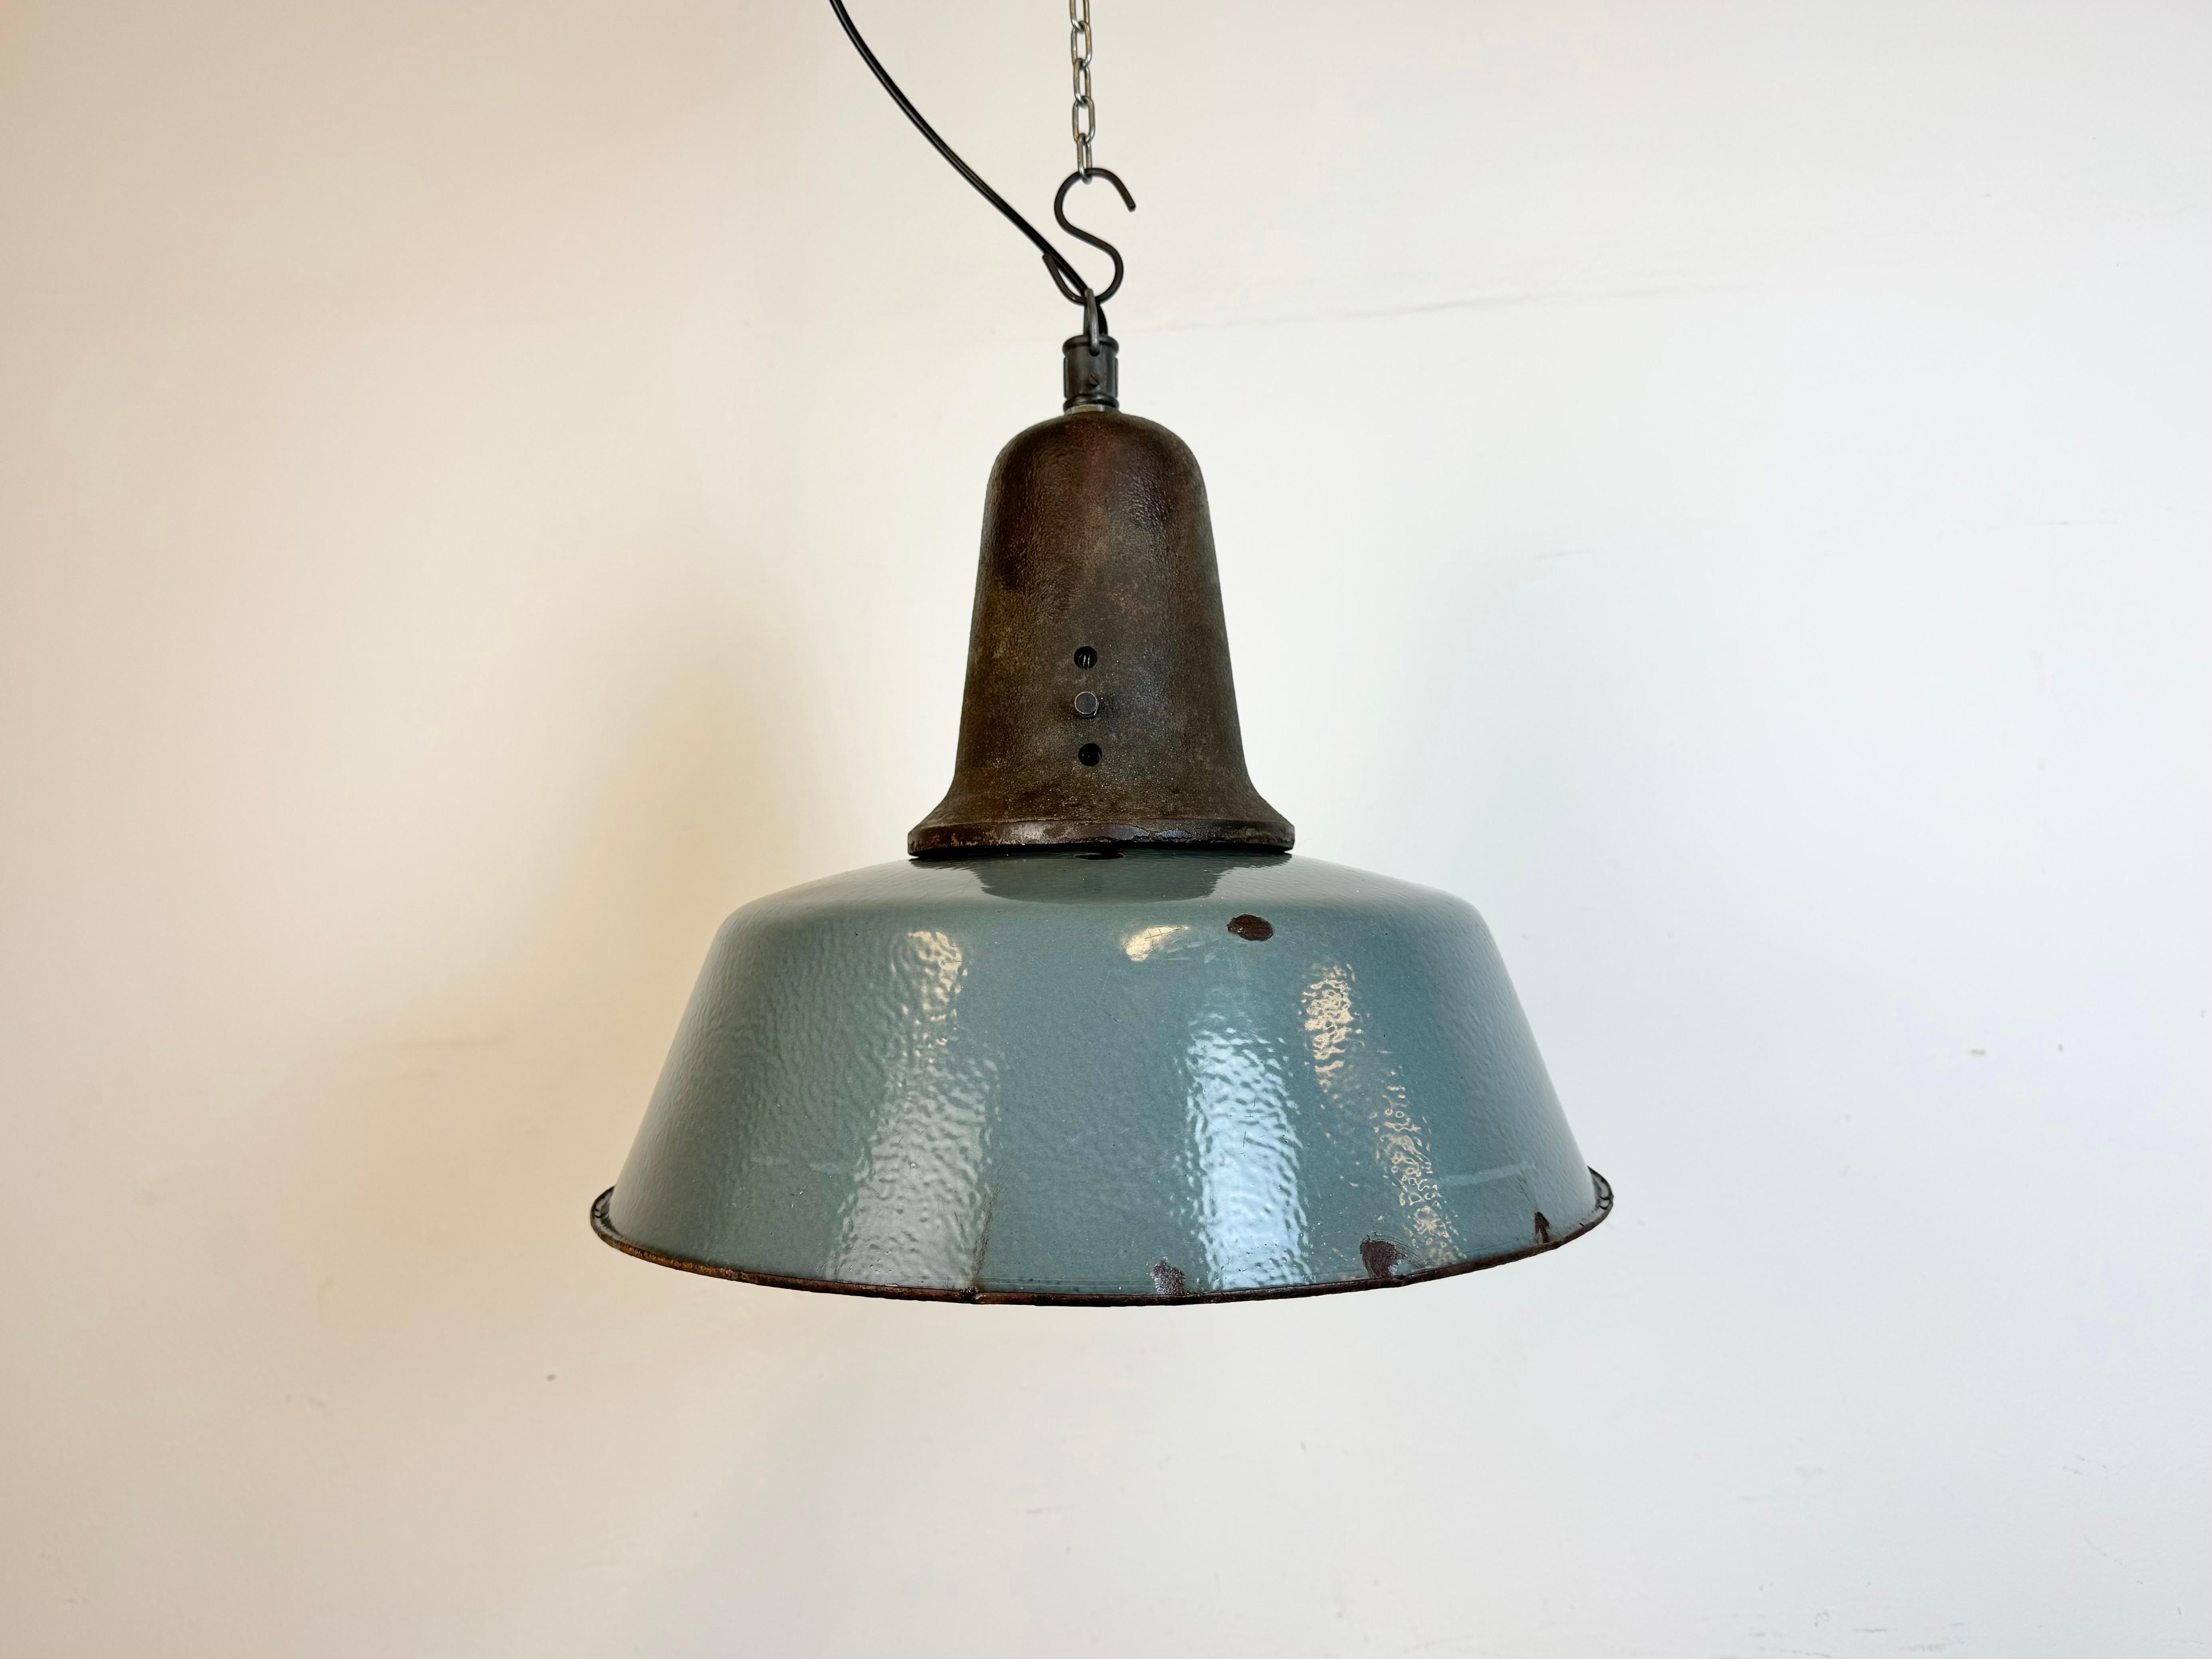 Industrial grey enamel pendant light made in Poland during the 1960s. White enamel inside the shade. Cast iron top. The porcelain socket requires standard E 27/ E26 light bulbs. New wire. Fully functional. The weight of the lamp is 4,5 kg.